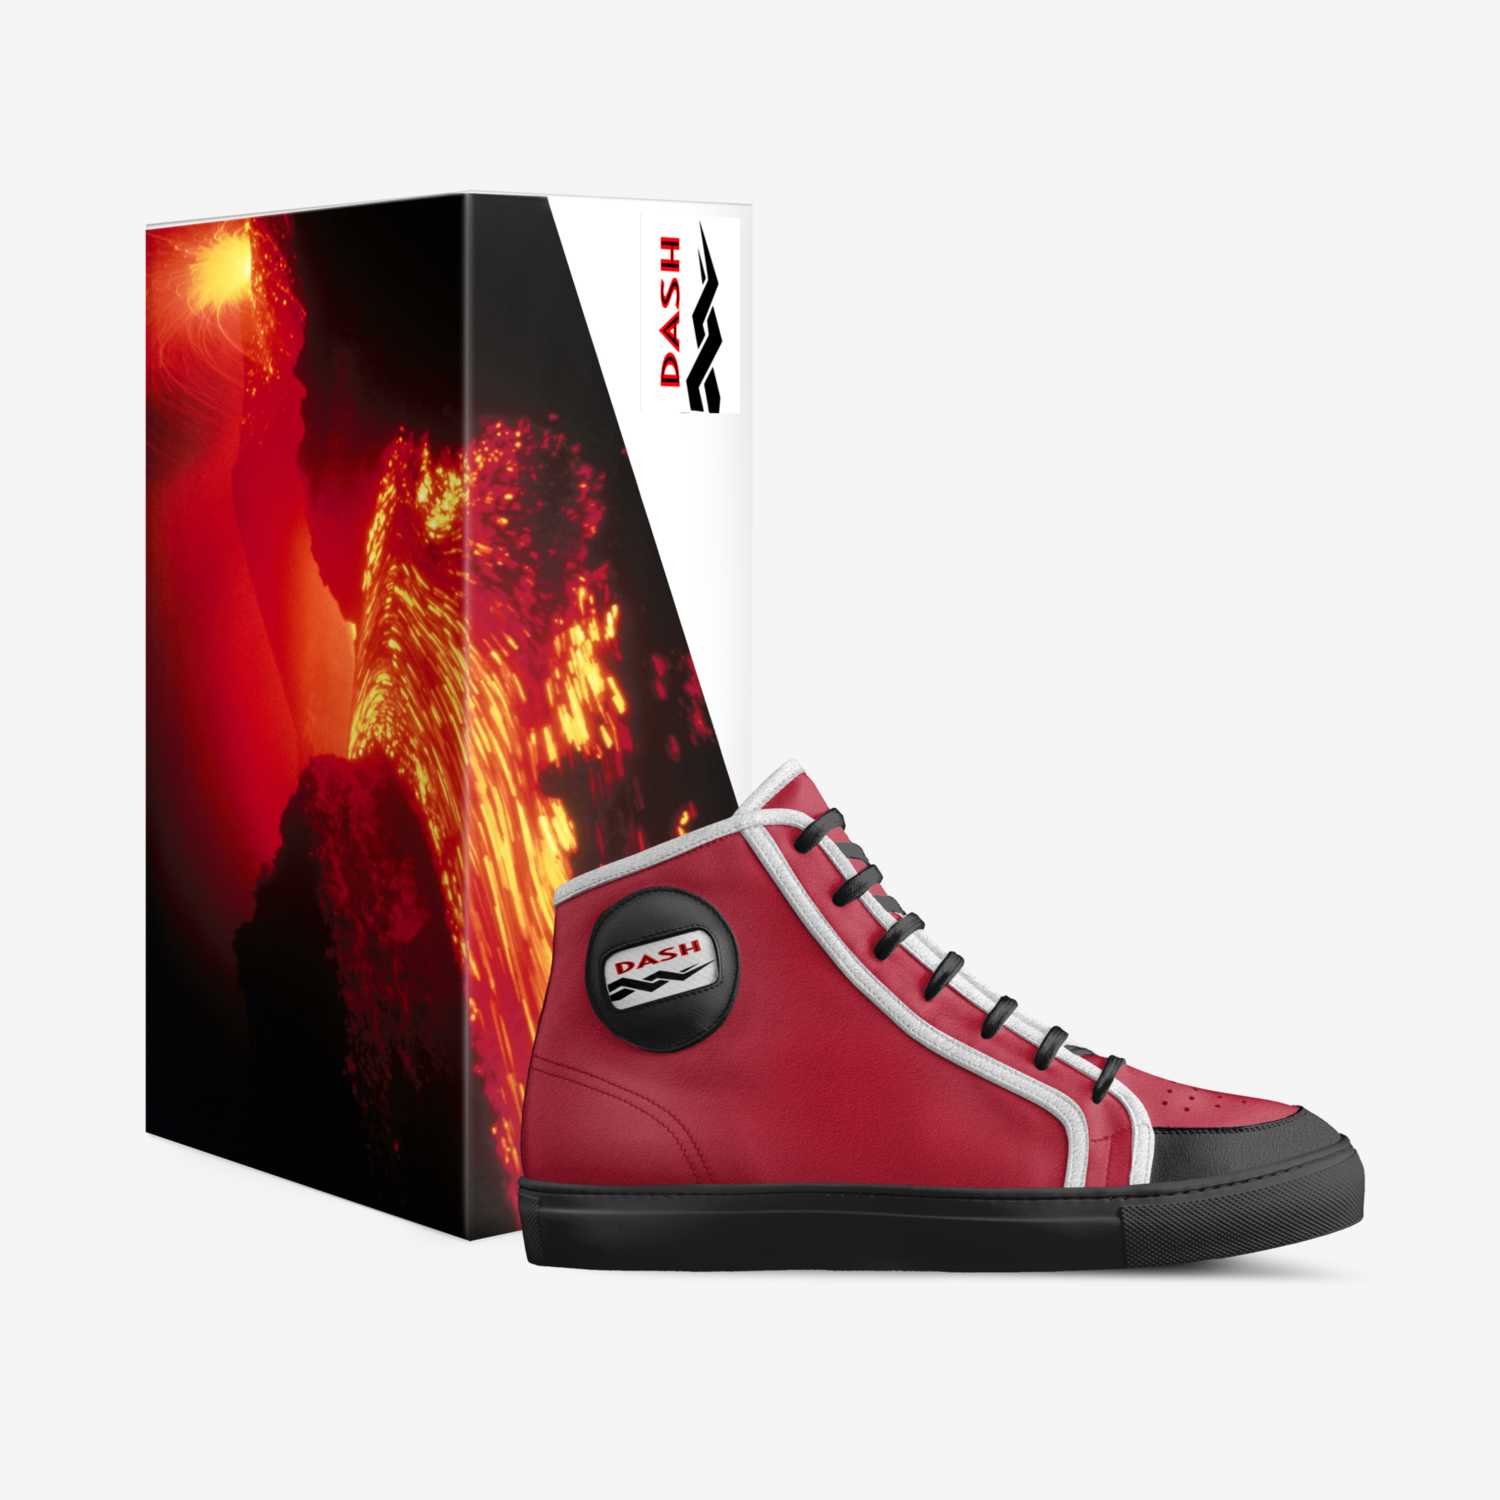 Lava custom made in Italy shoes by Dash Footwear | Box view